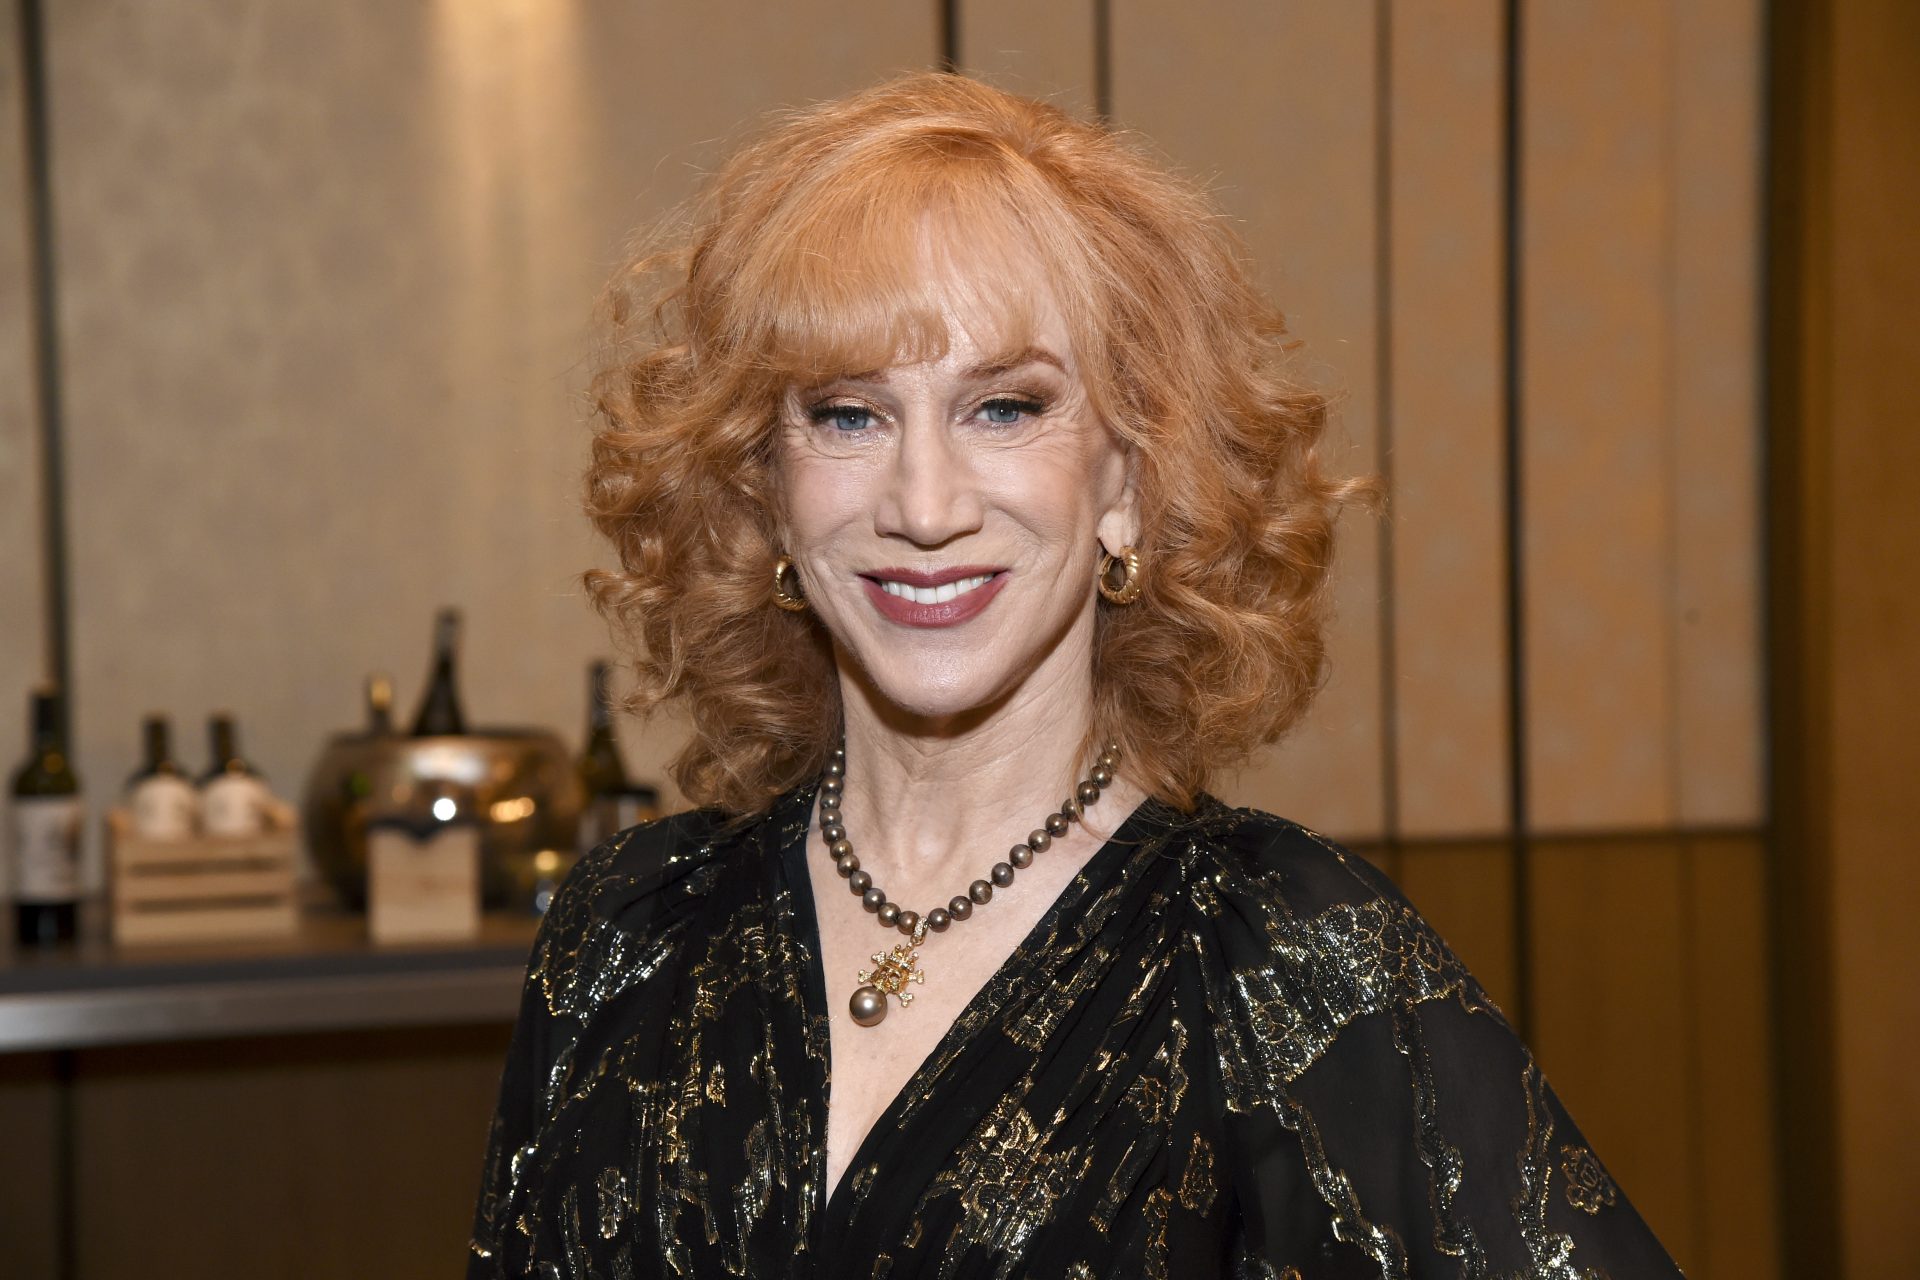 Kathy Griffin said she didn't realize that she faced such serious charges for Trump head photo